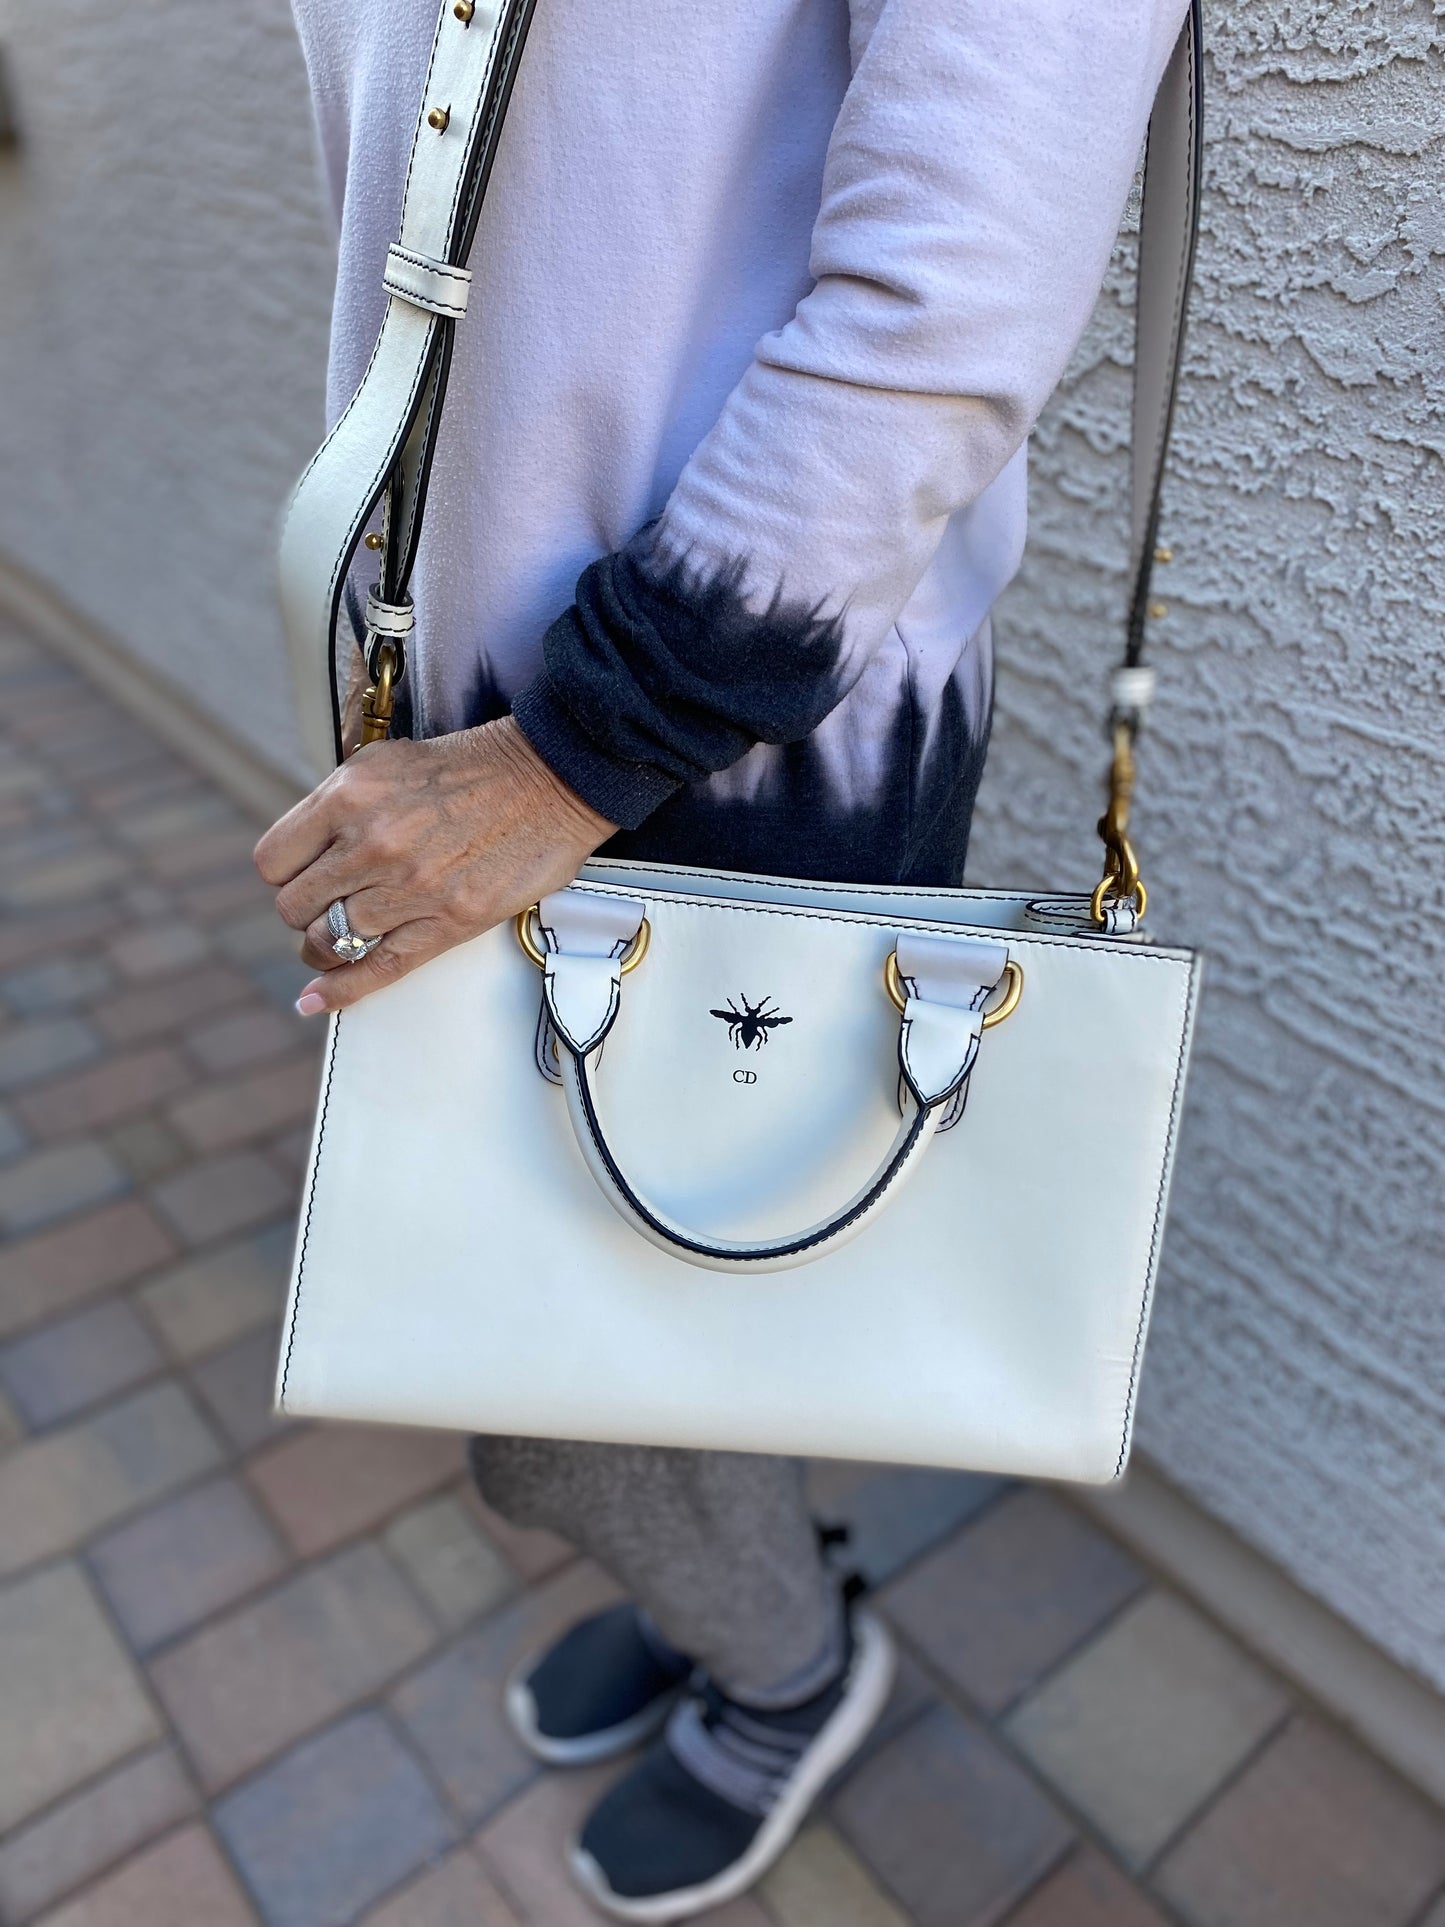 Christian Dior White Leather D-Bee Top Handle Bag